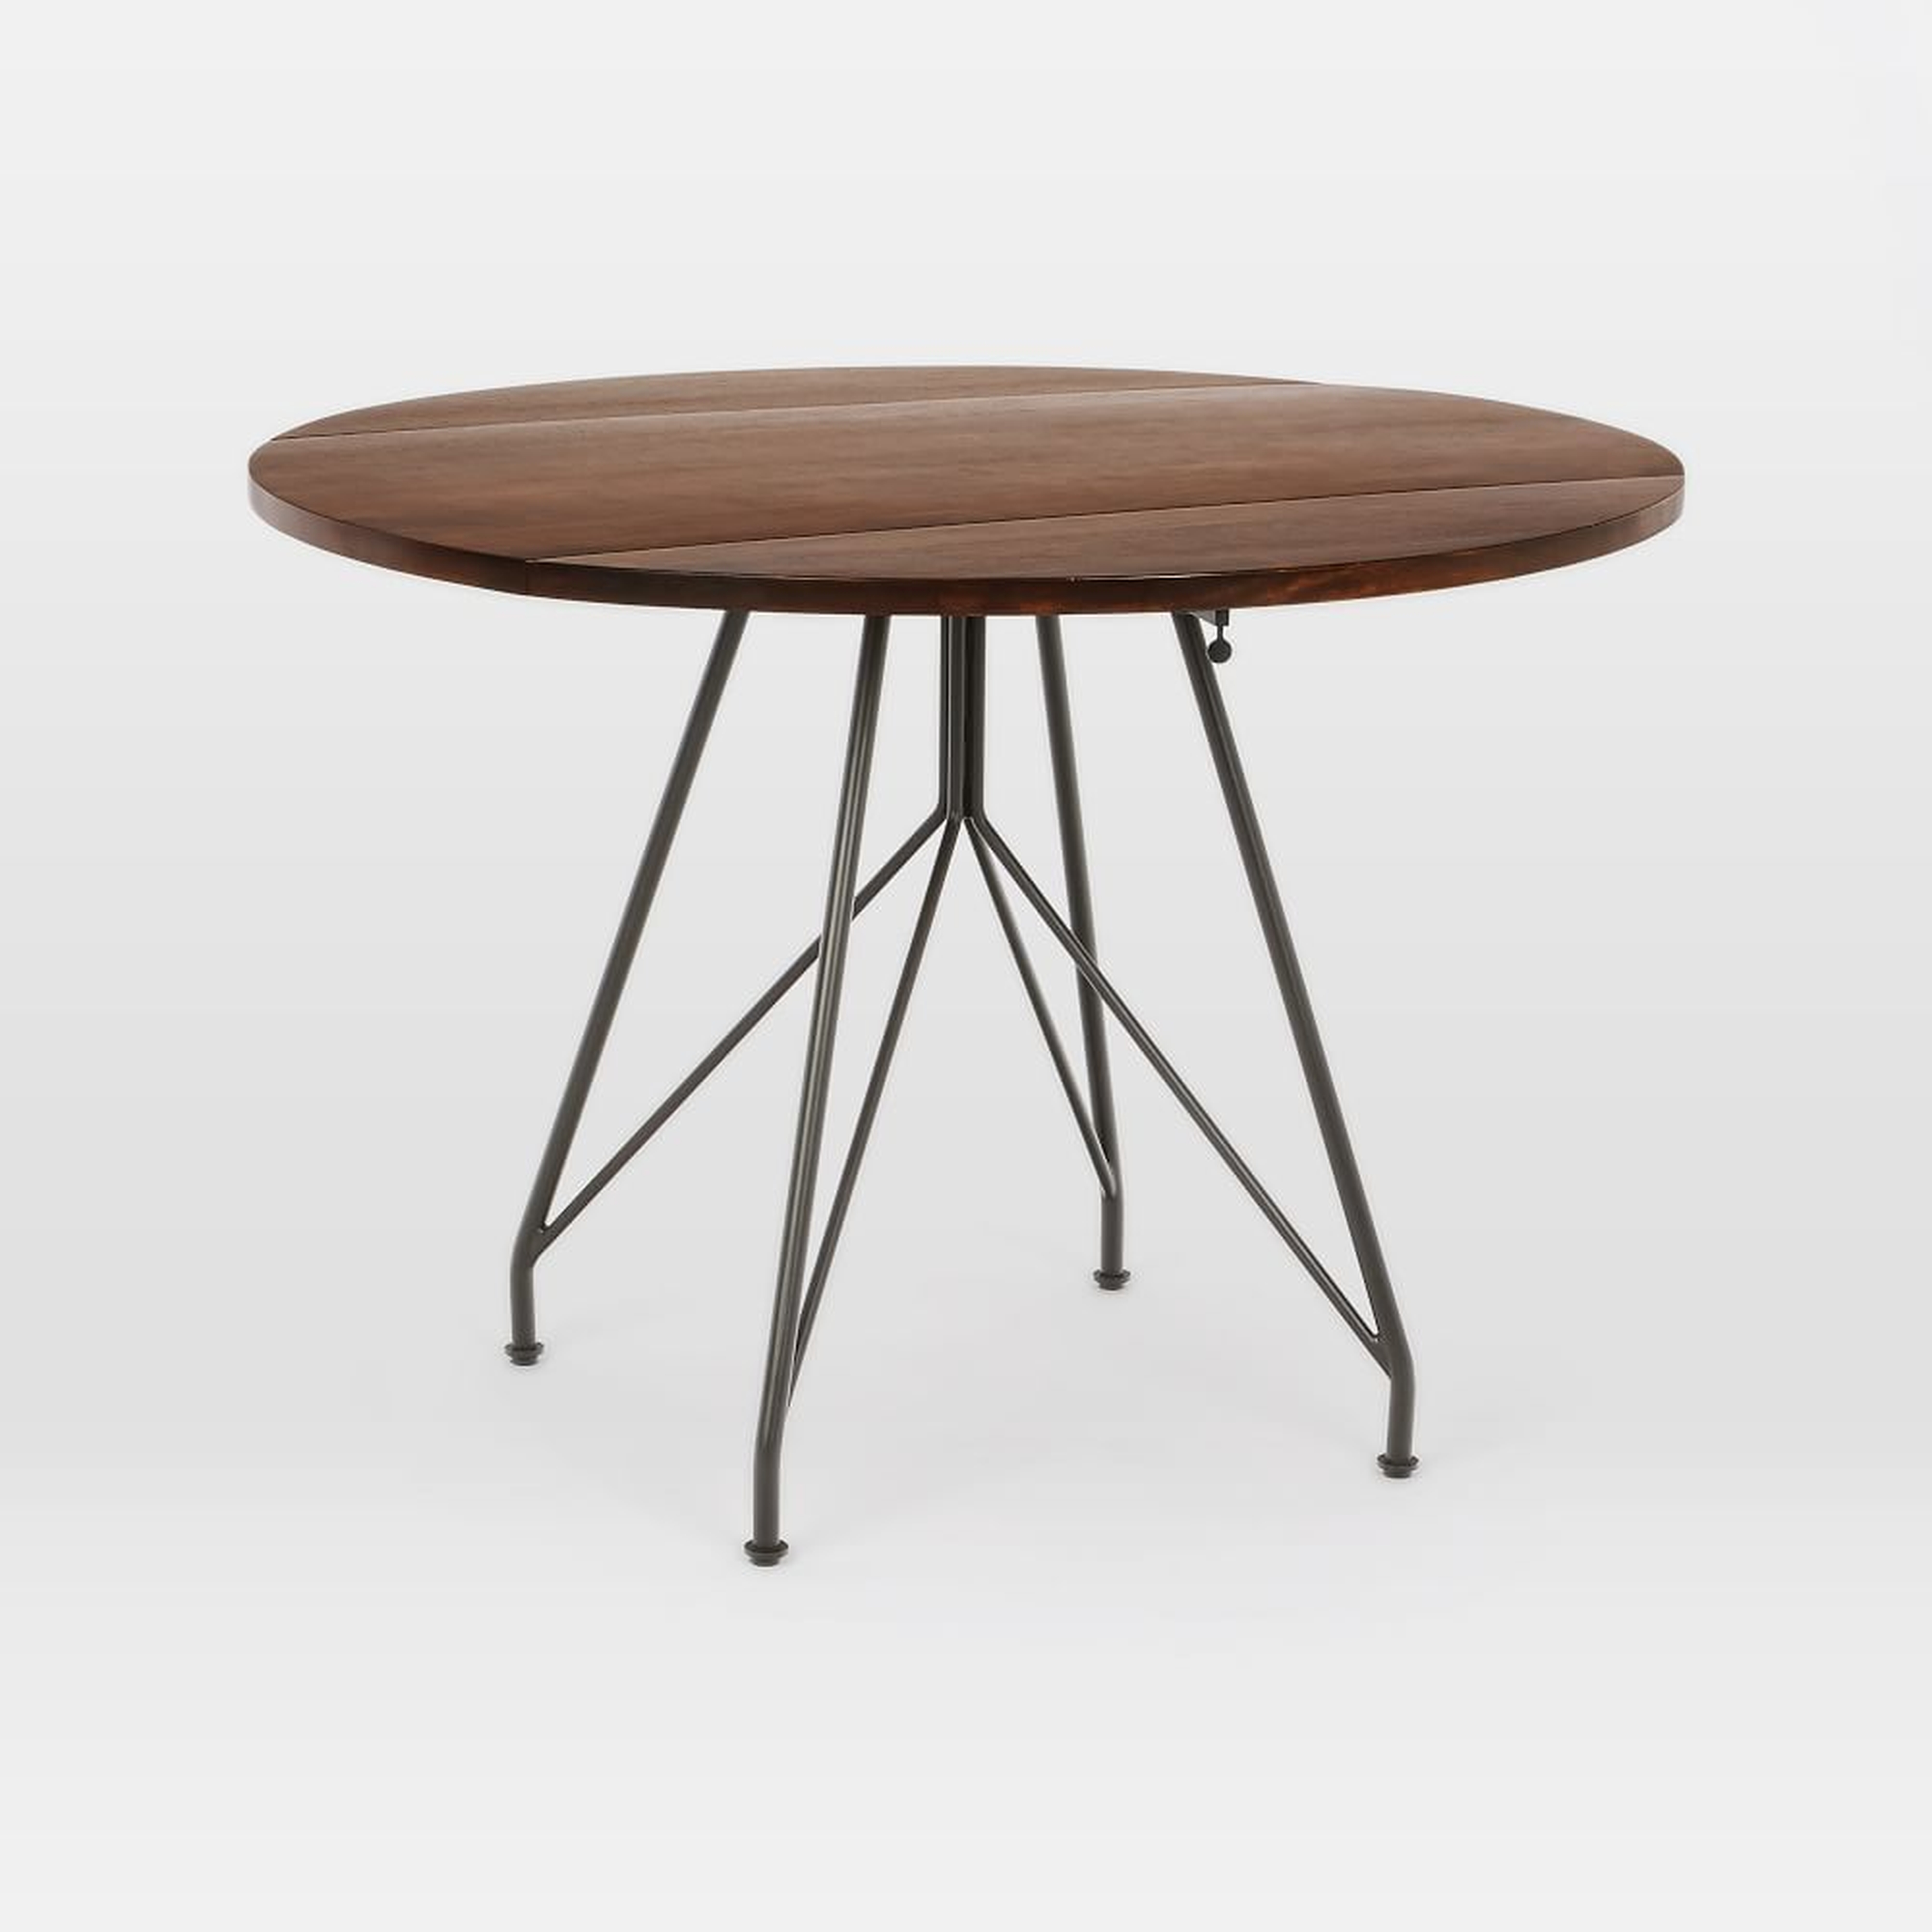 Jules Expandable Dining Table, Round, 42", Walnut - West Elm